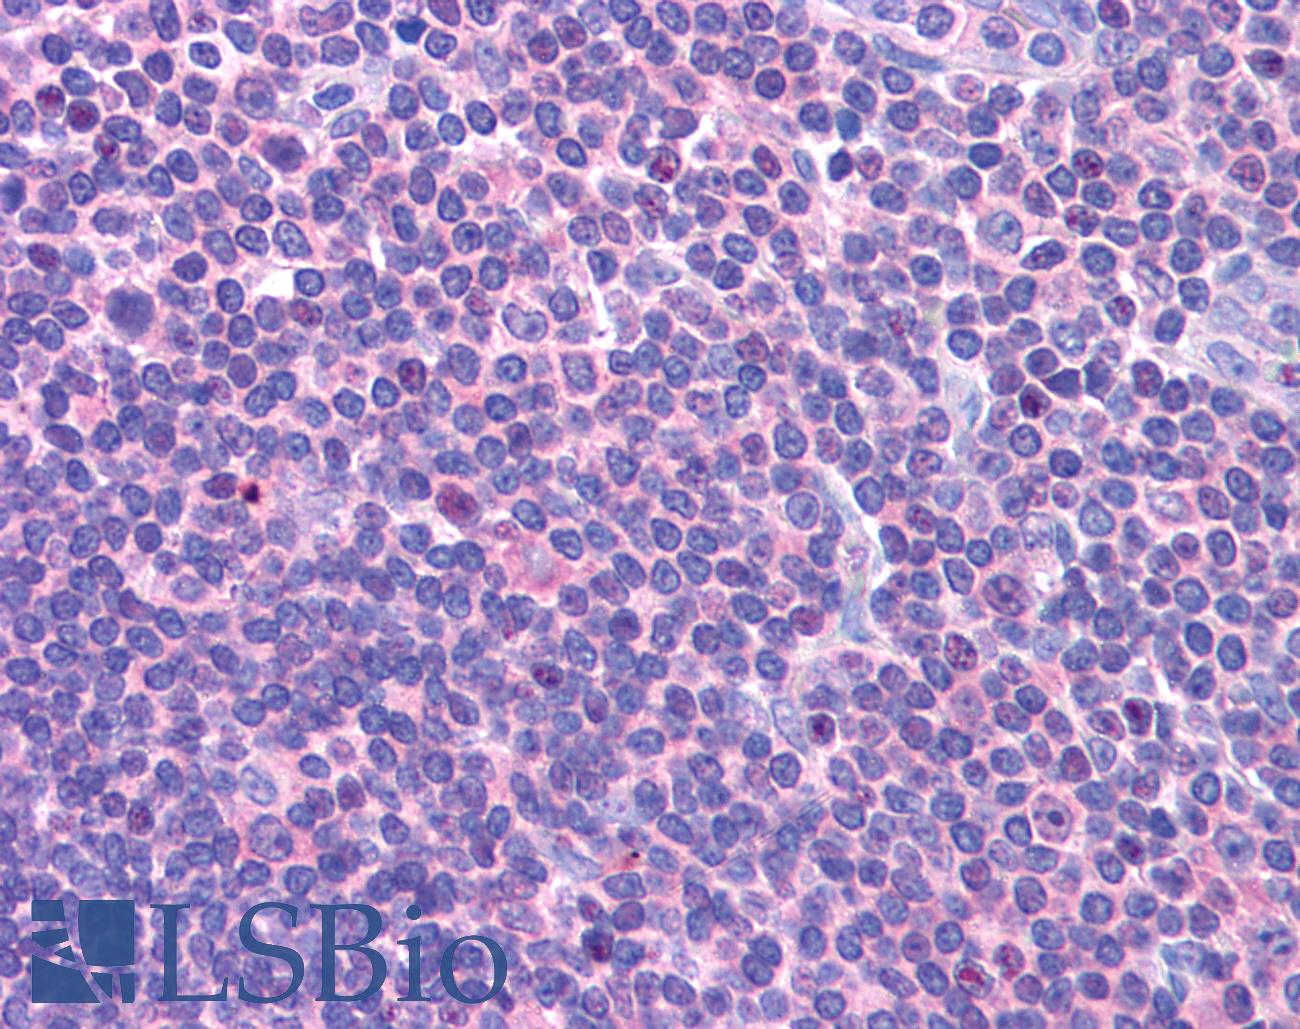 DCLRE1C / Artemis Antibody - Anti-DCLRE1C / ARTEMIS antibody IHC of human lymph node. Immunohistochemistry of formalin-fixed, paraffin-embedded tissue after heat-induced antigen retrieval. Antibody concentration 5 ug/ml.